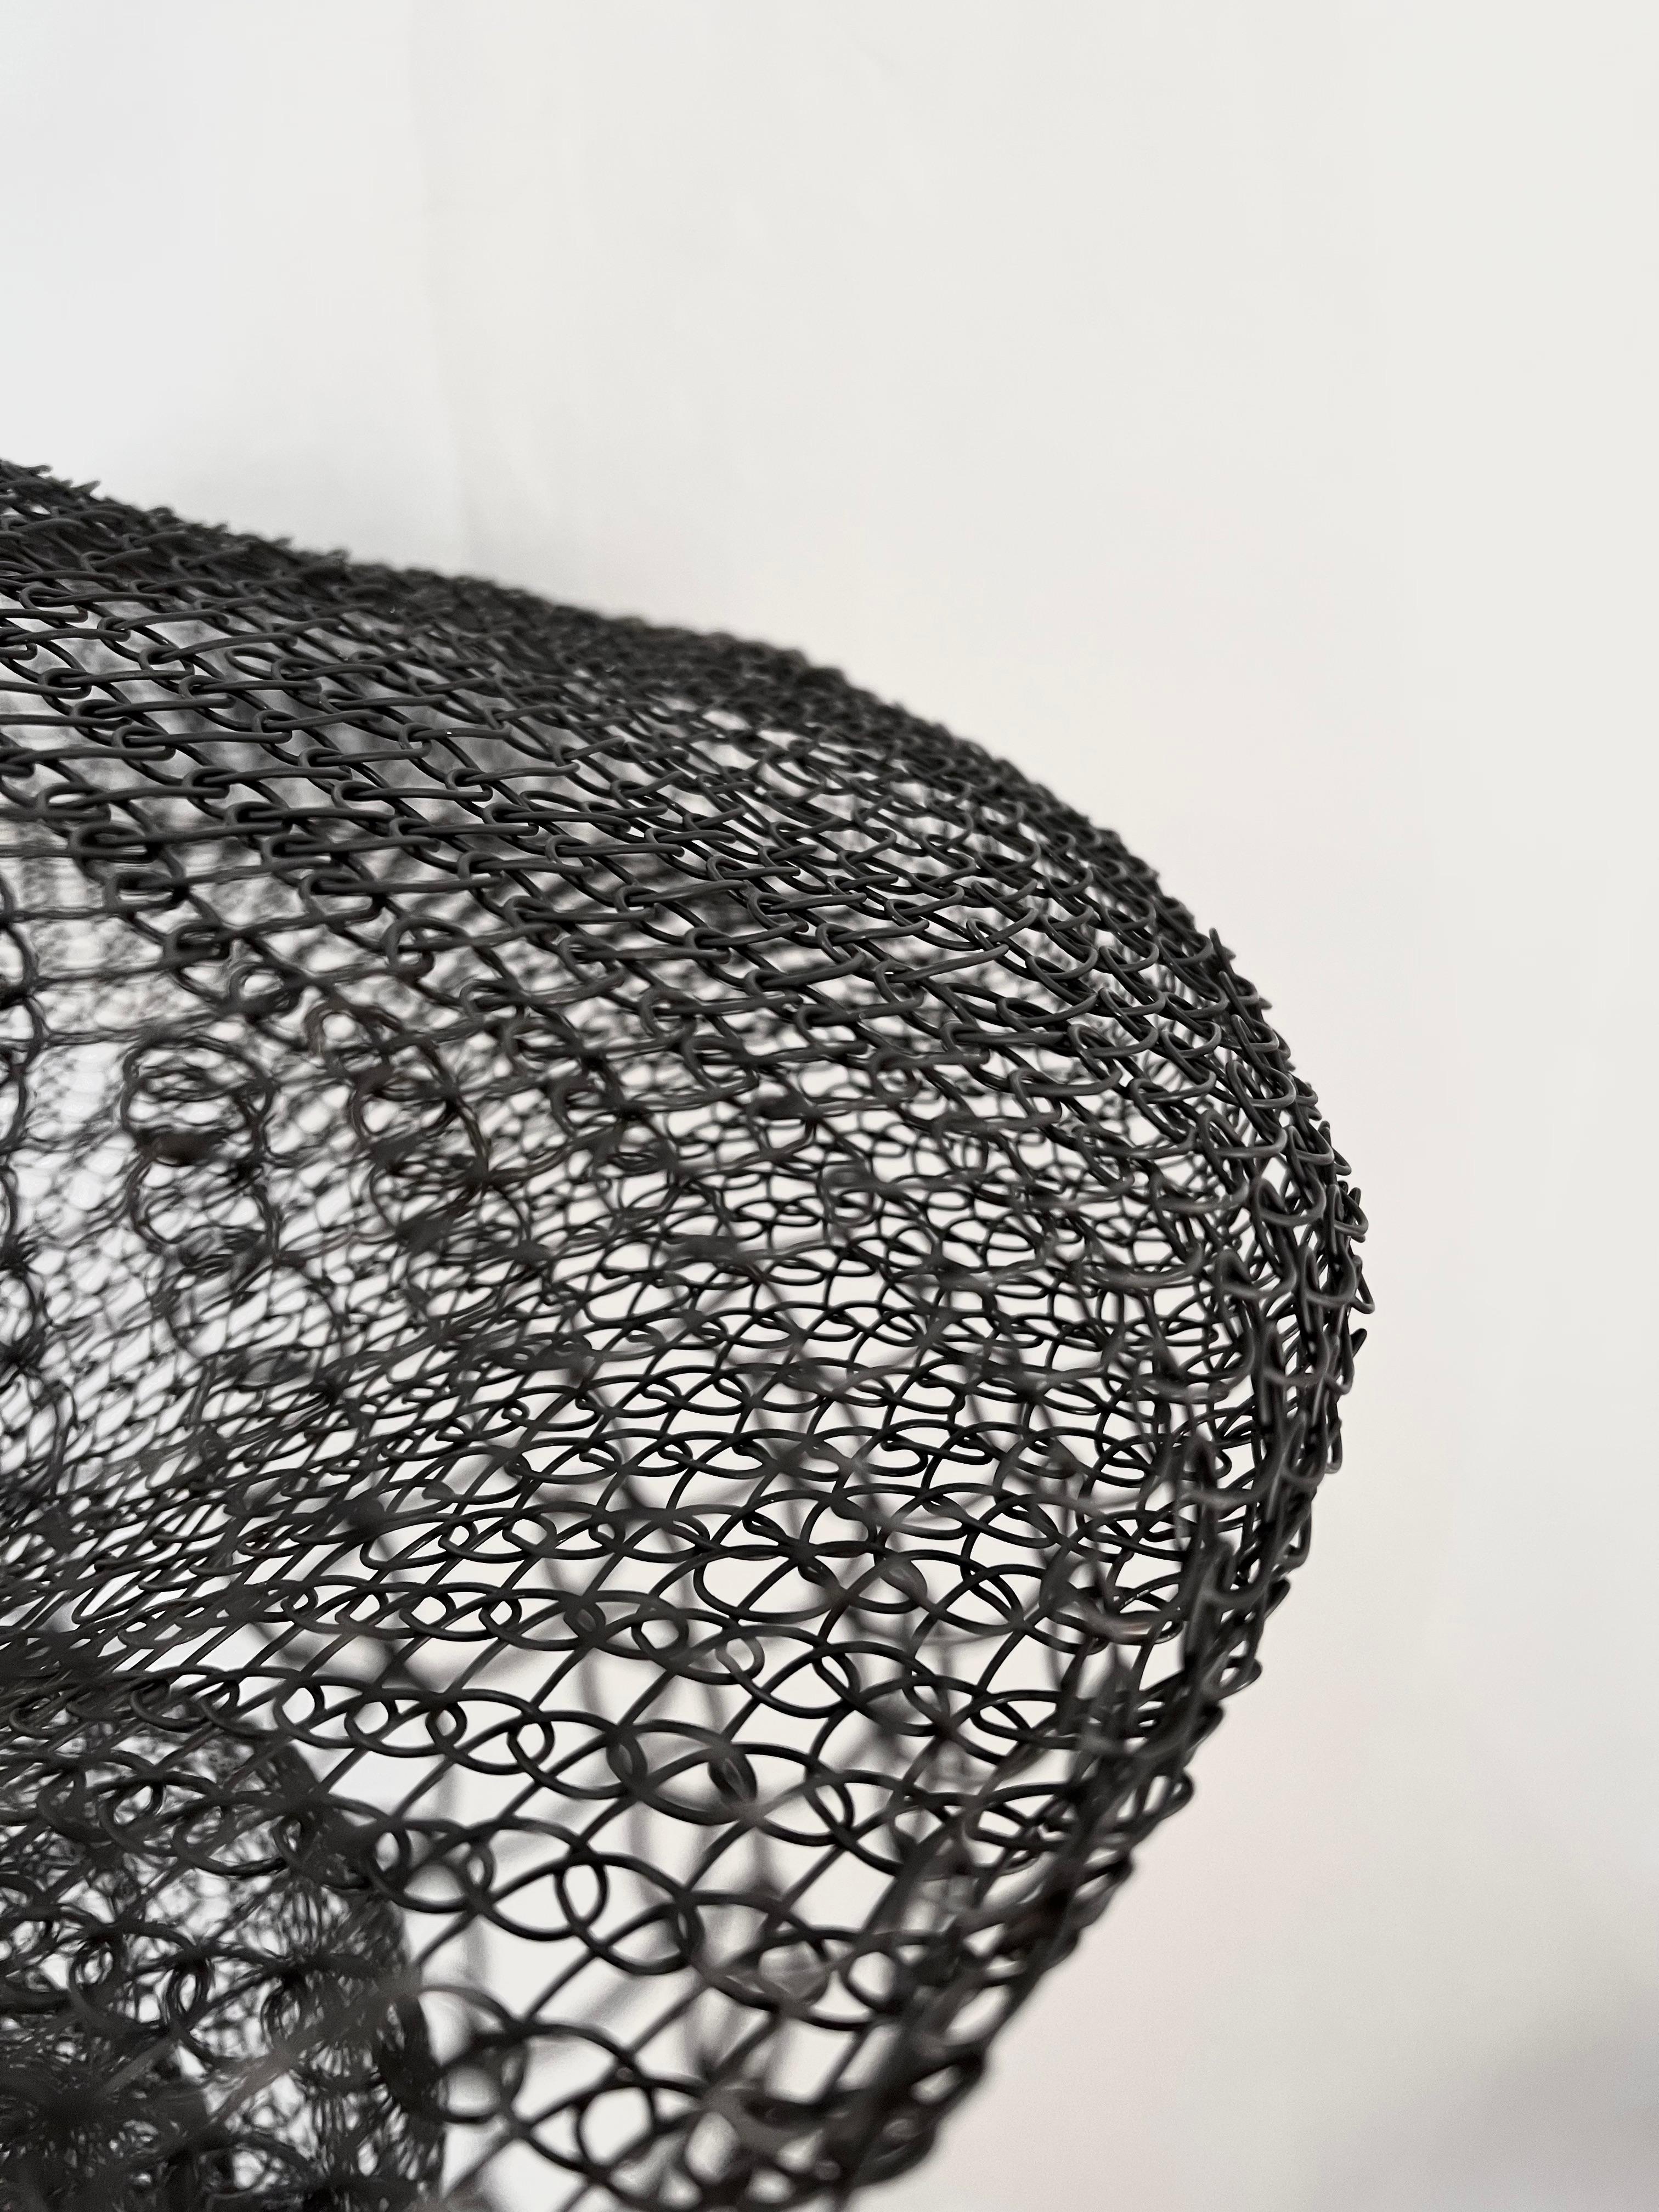 Organic Woven Mesh Wire Sculpture by Ulrikk Dufosse For Sale 3